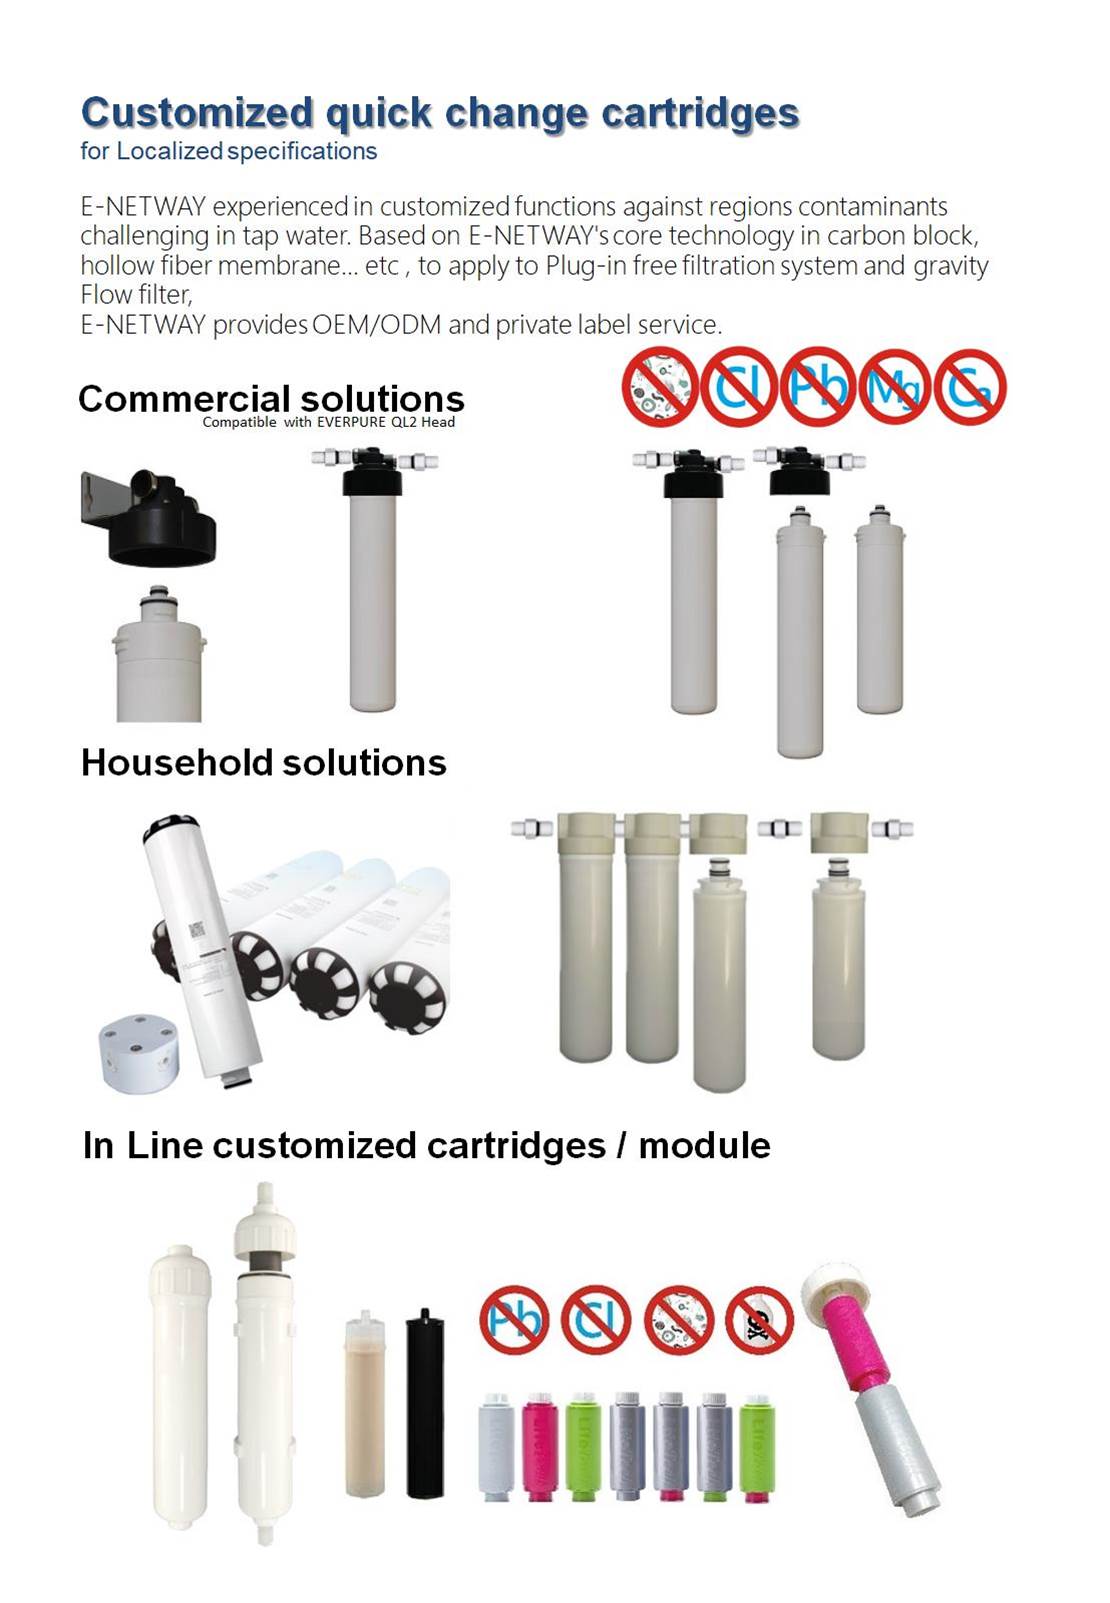 We provide quick change water filter and inline water filter cartridges.